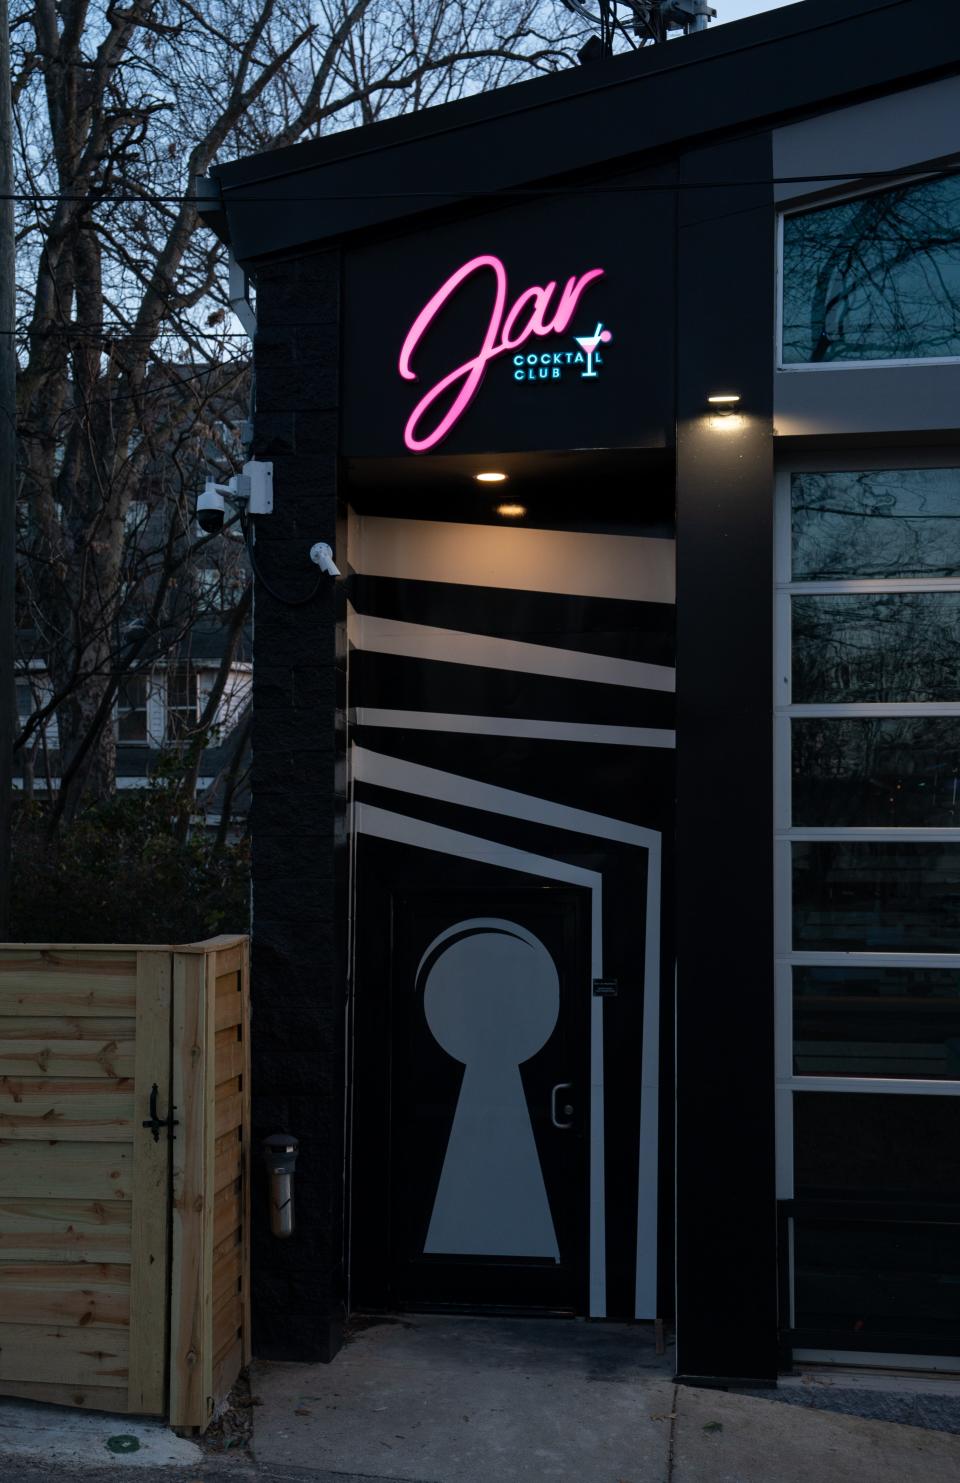 Jar Cocktail Club at 1990 Wedgewood Avenue in Nashville, Tenn., will open in early February 2024.